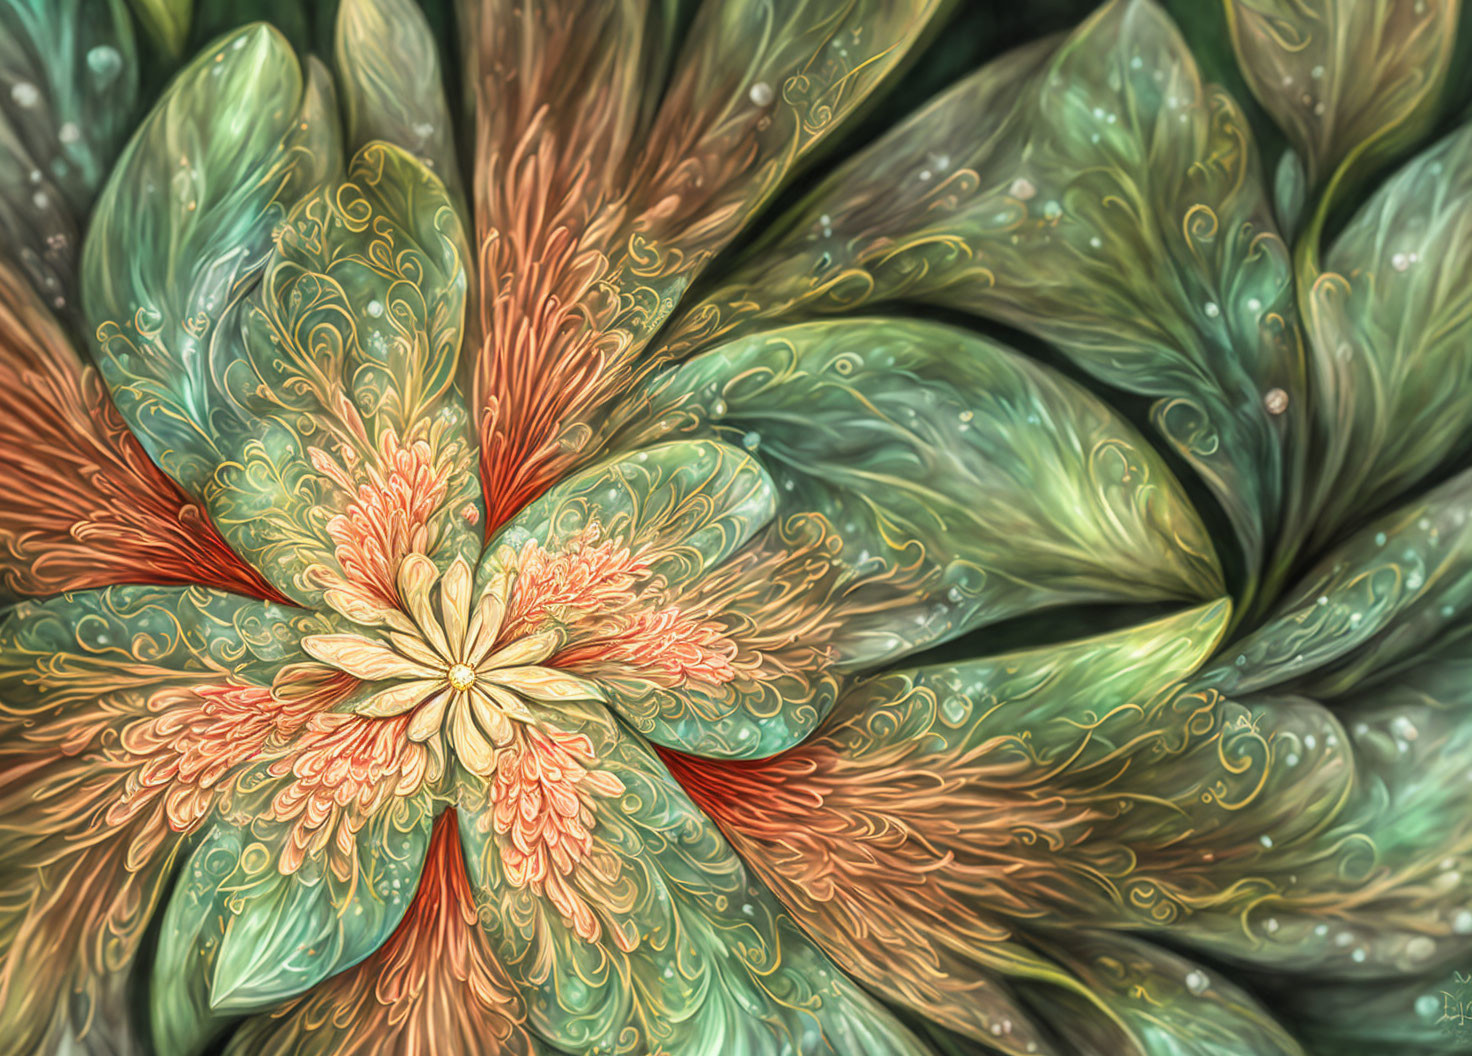 Intricate Floral Fractal Design in Green, Orange, and Cream